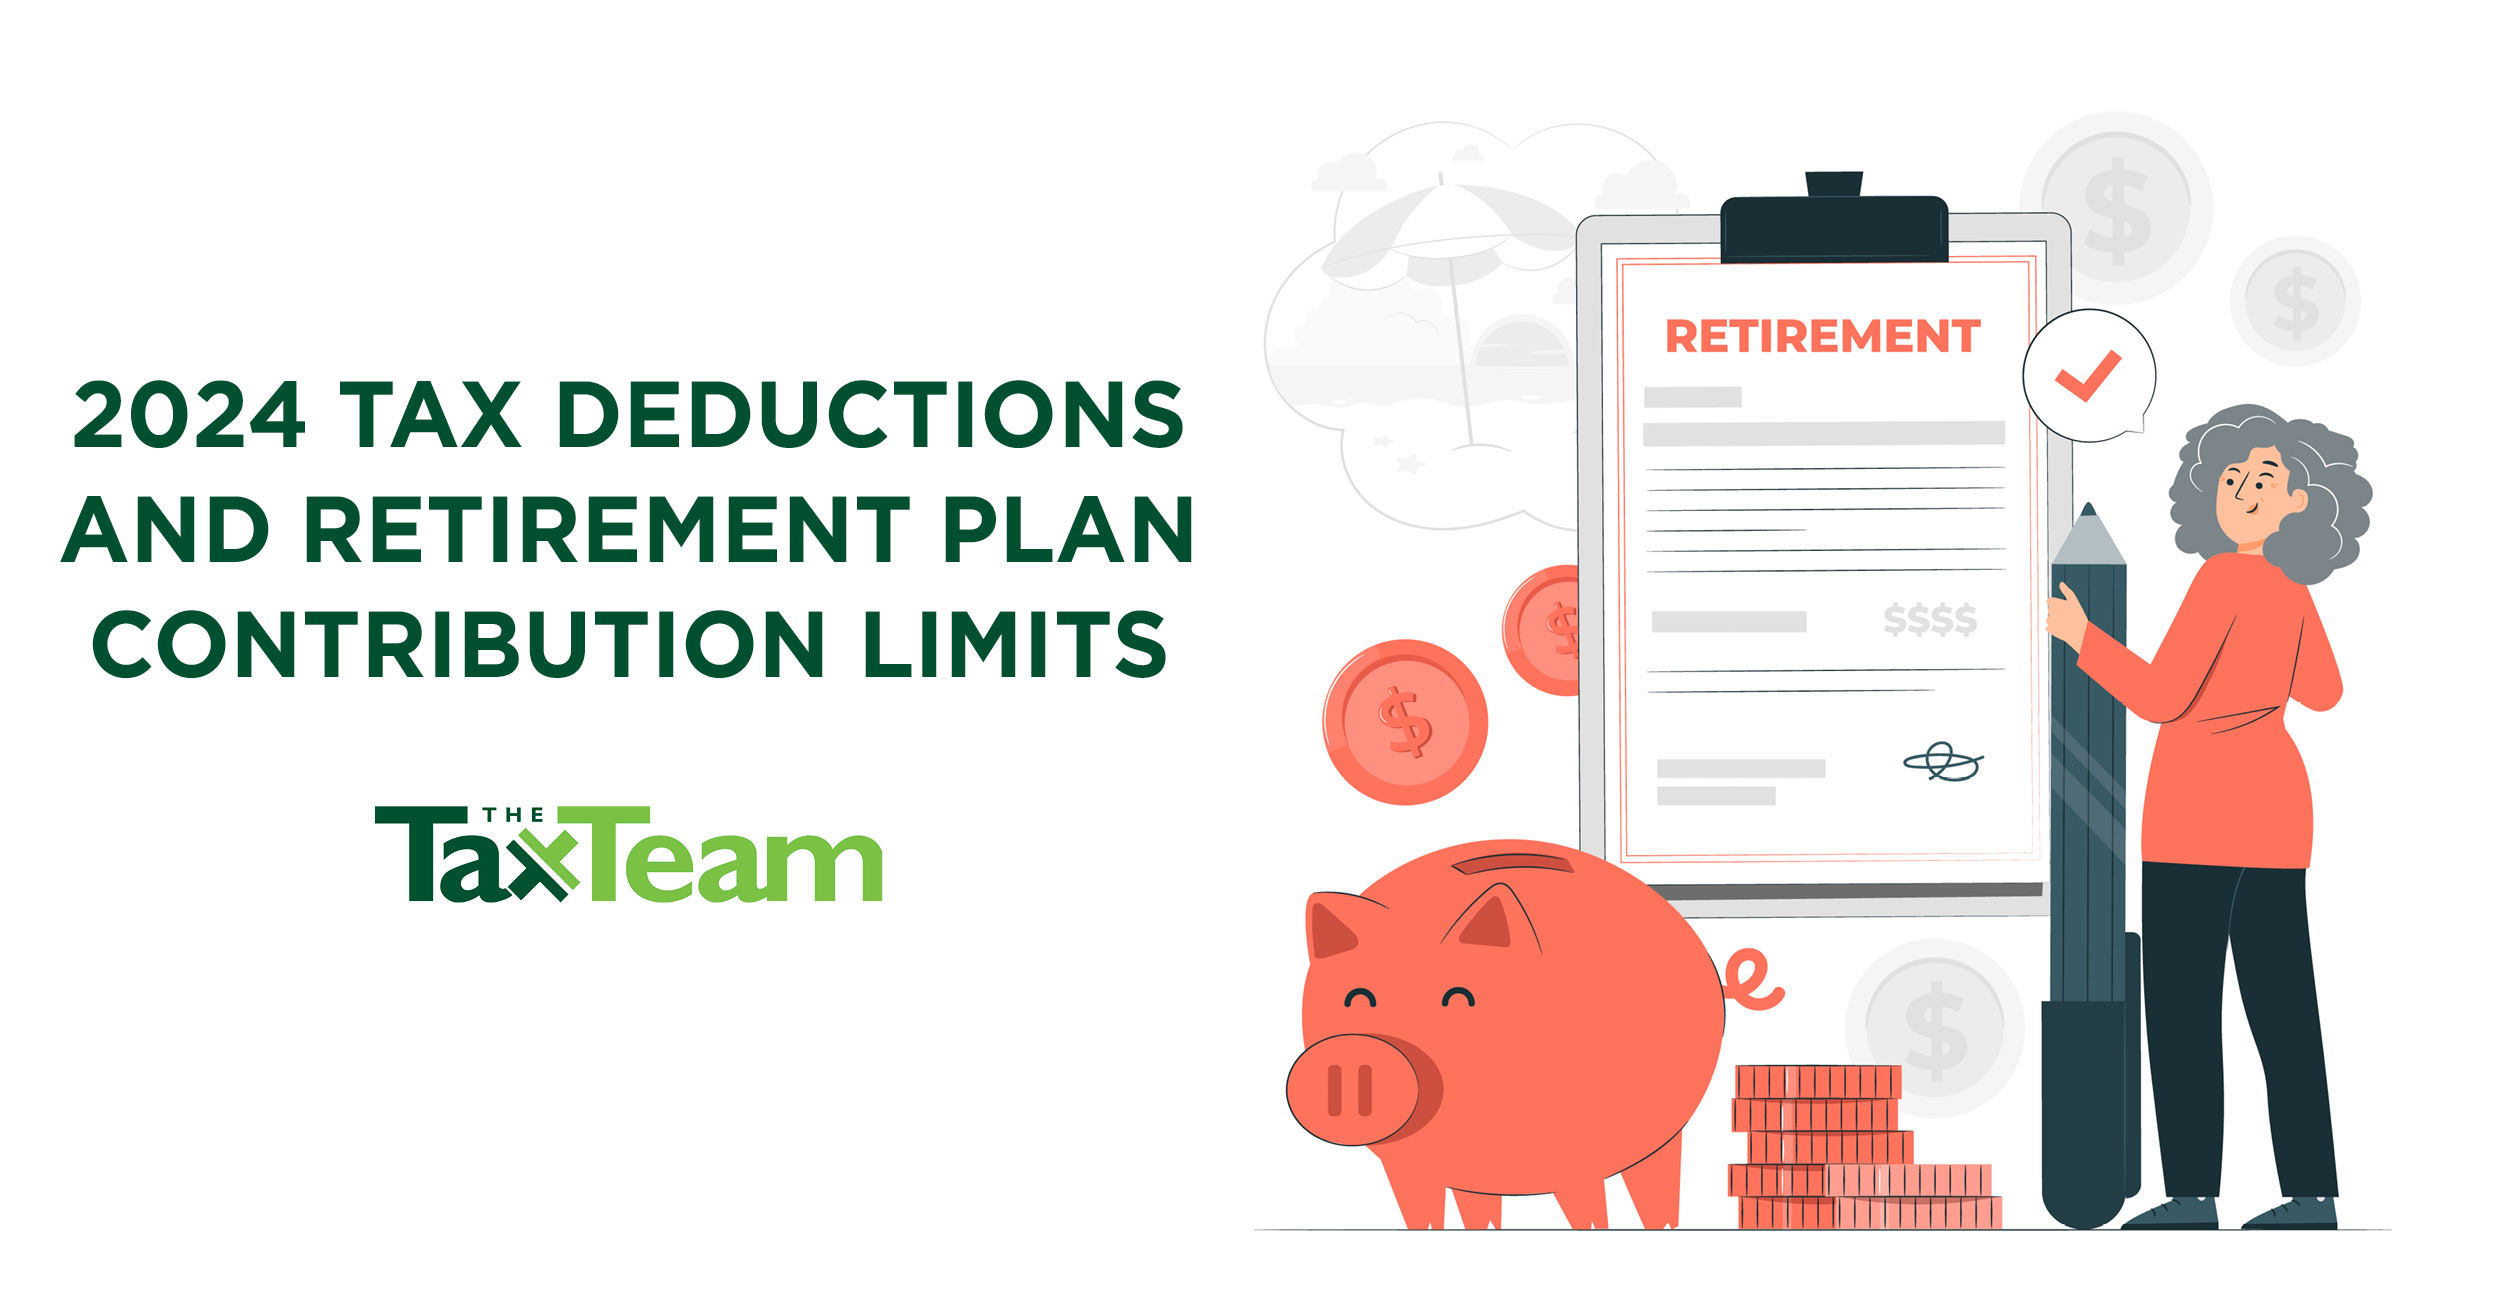 2024 TAX DEDUCTIONS AND RETIREMENT PLAN CONTRIBUTION LIMITS